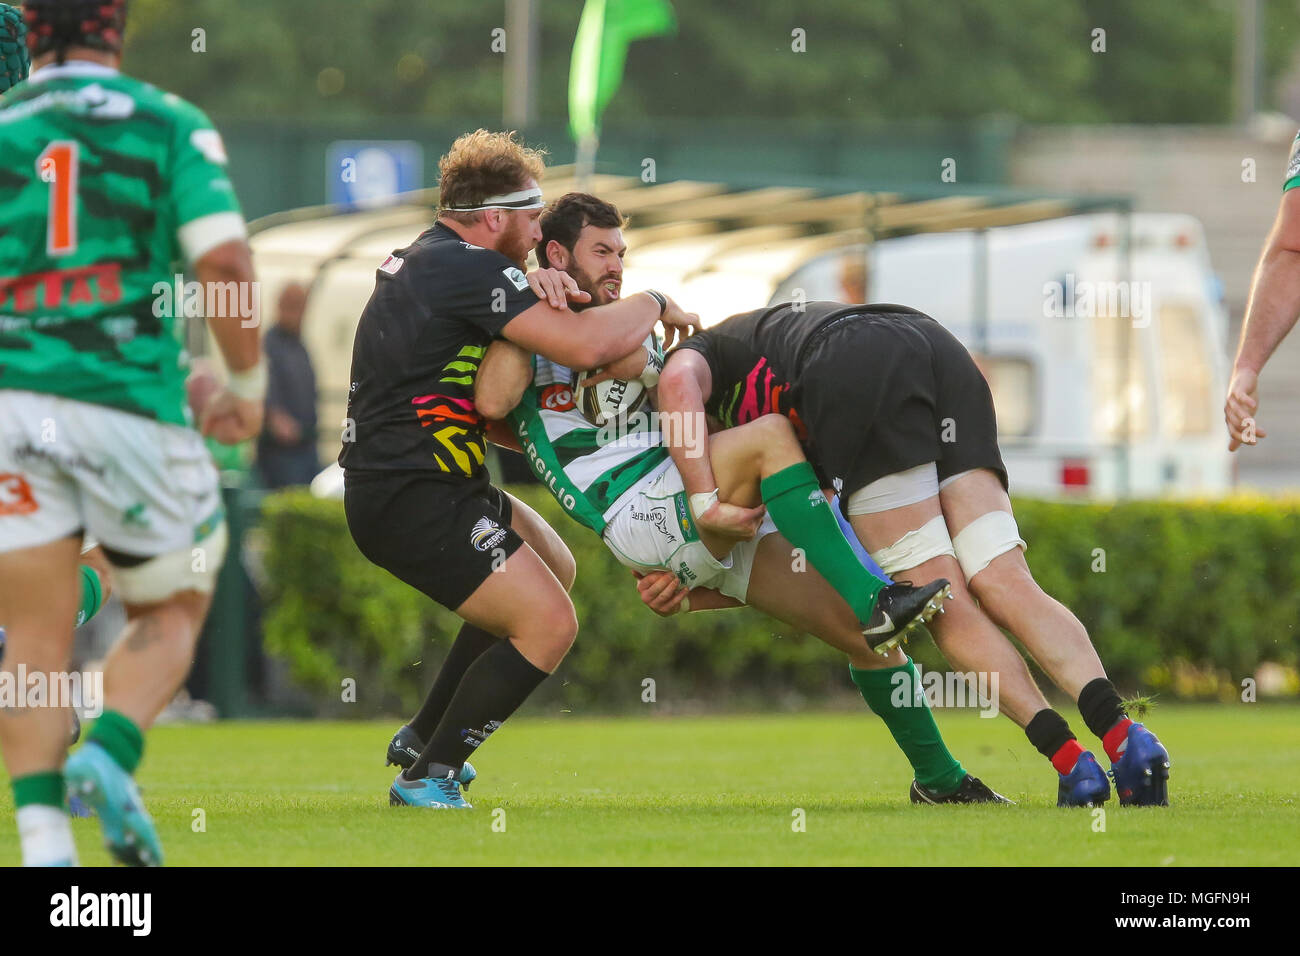 Treviso, Italy. 28th April, 2018. Benetton's full back Jayden Hayward tries  to keep the ball after